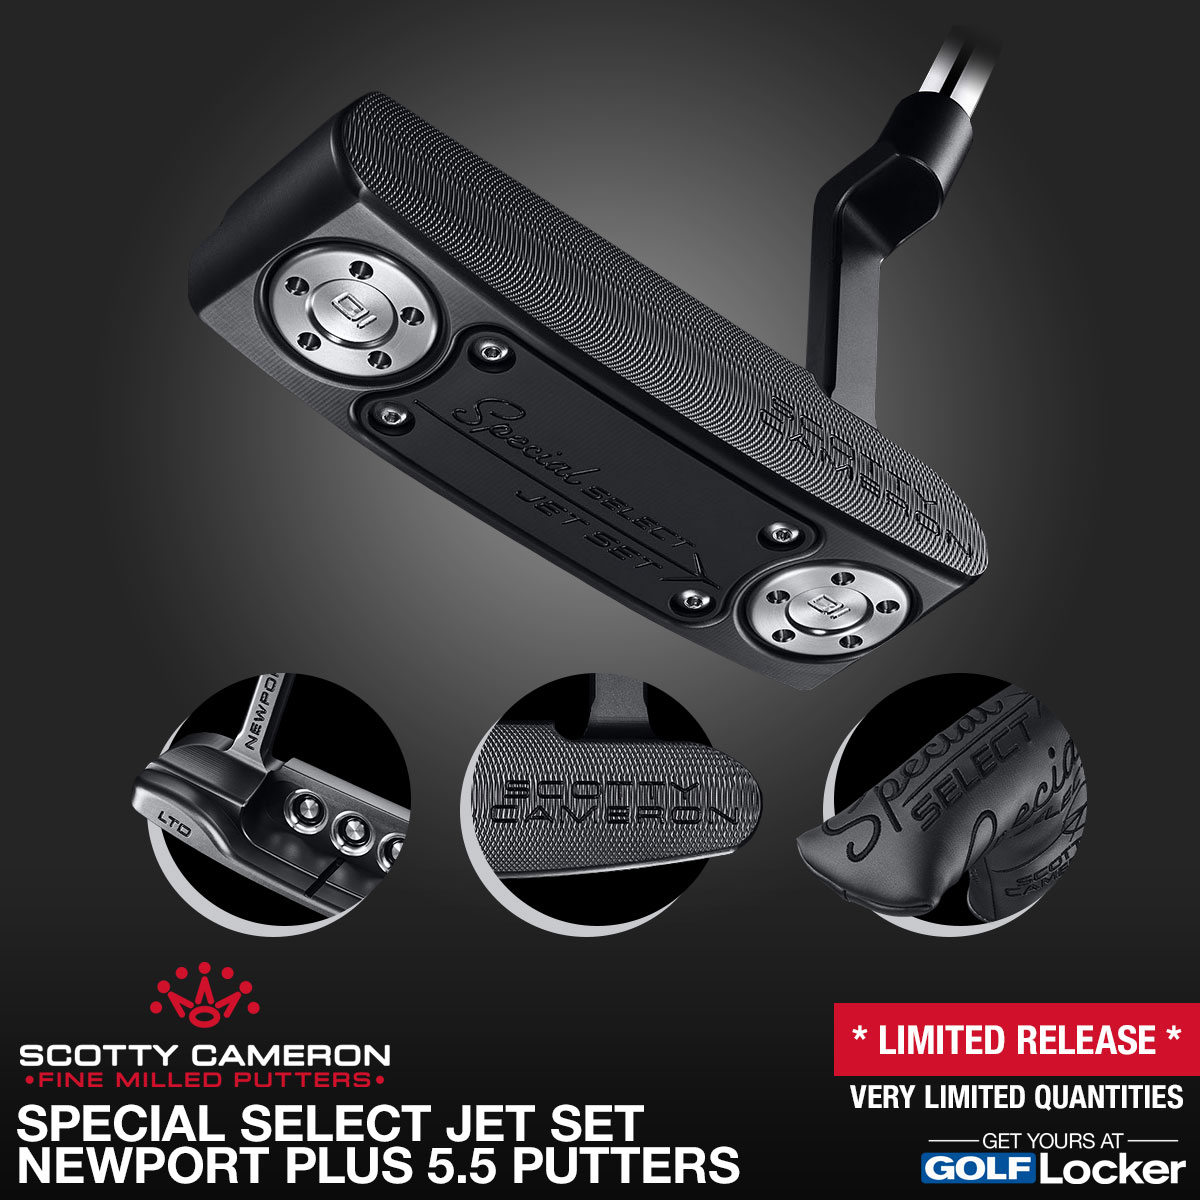 Scotty Cameron Special Select Jet Set Newport Plus 5.5 Putters - Limited Release